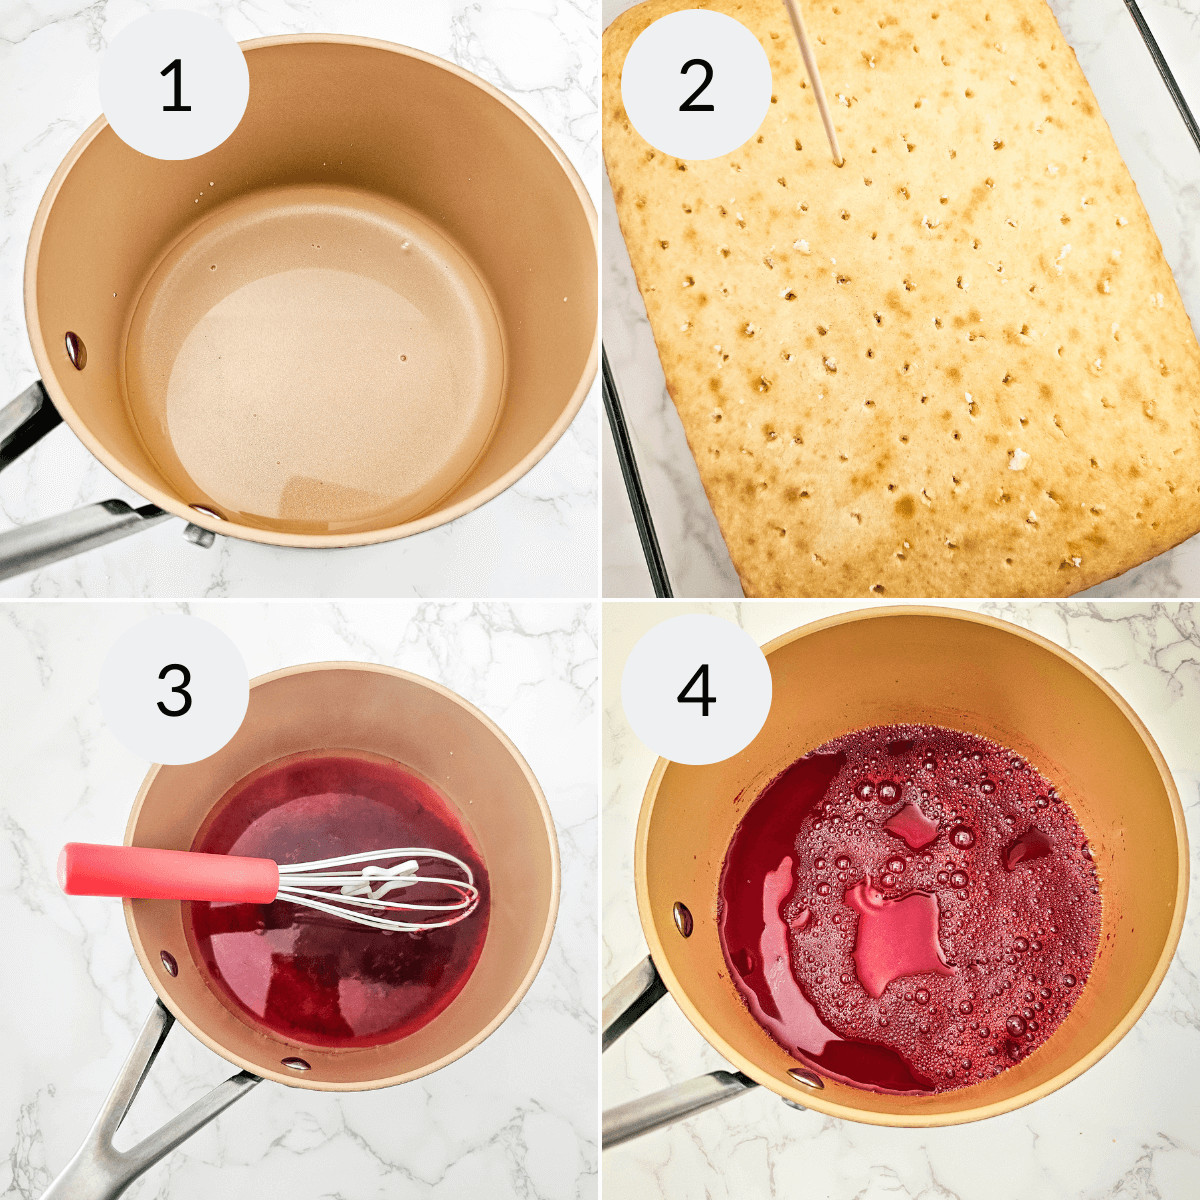 Step-by-step images showing the preparation of a recipe: 1) empty pot, 2) cherry, 3) mixing ingredients with a whisk, 4) cooked mixture in the